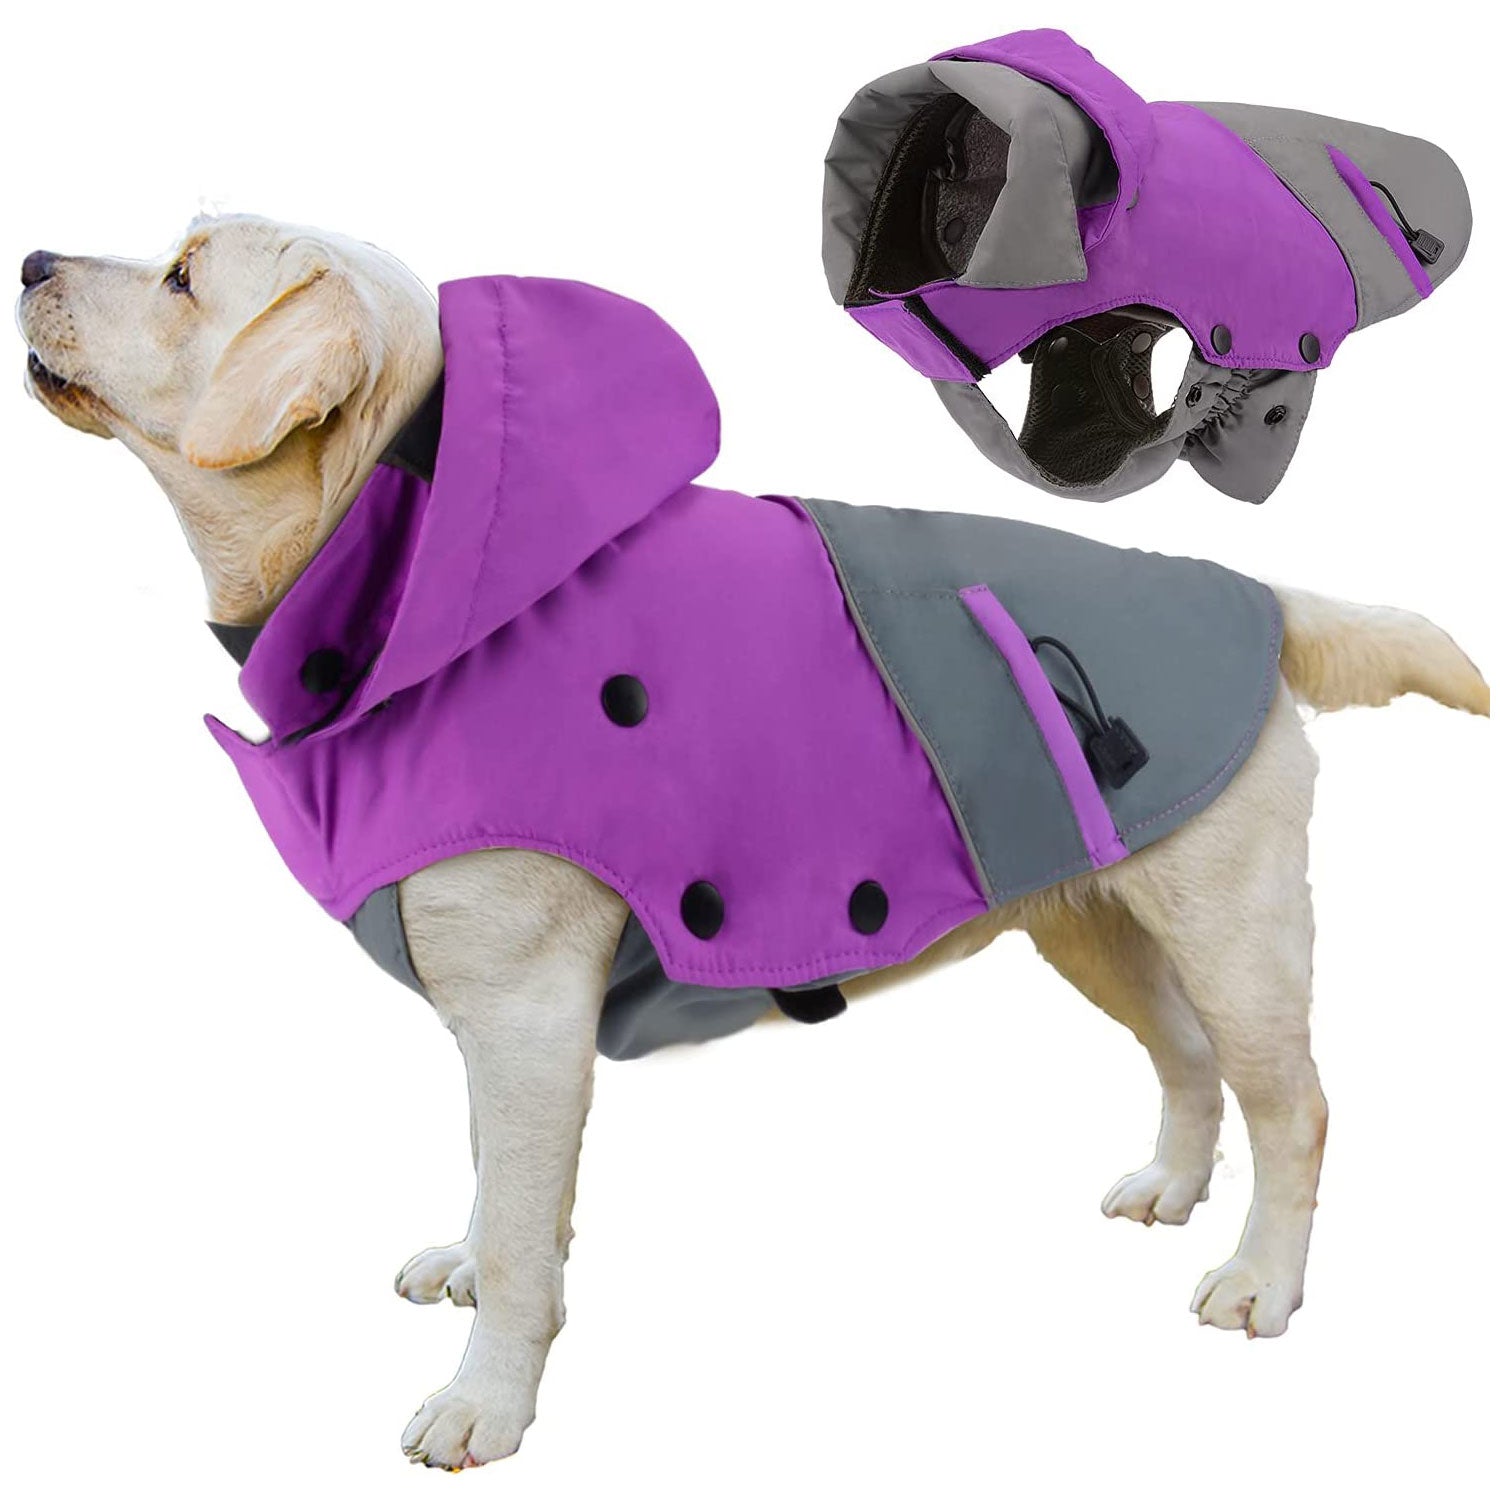 Pet Life Lightweight Adjustable 'Sporty Avalanche' Pet Coat - Blue, Medium,  Dog/Cat, Water Resistant, Machine Washable in the Pet Clothing department  at